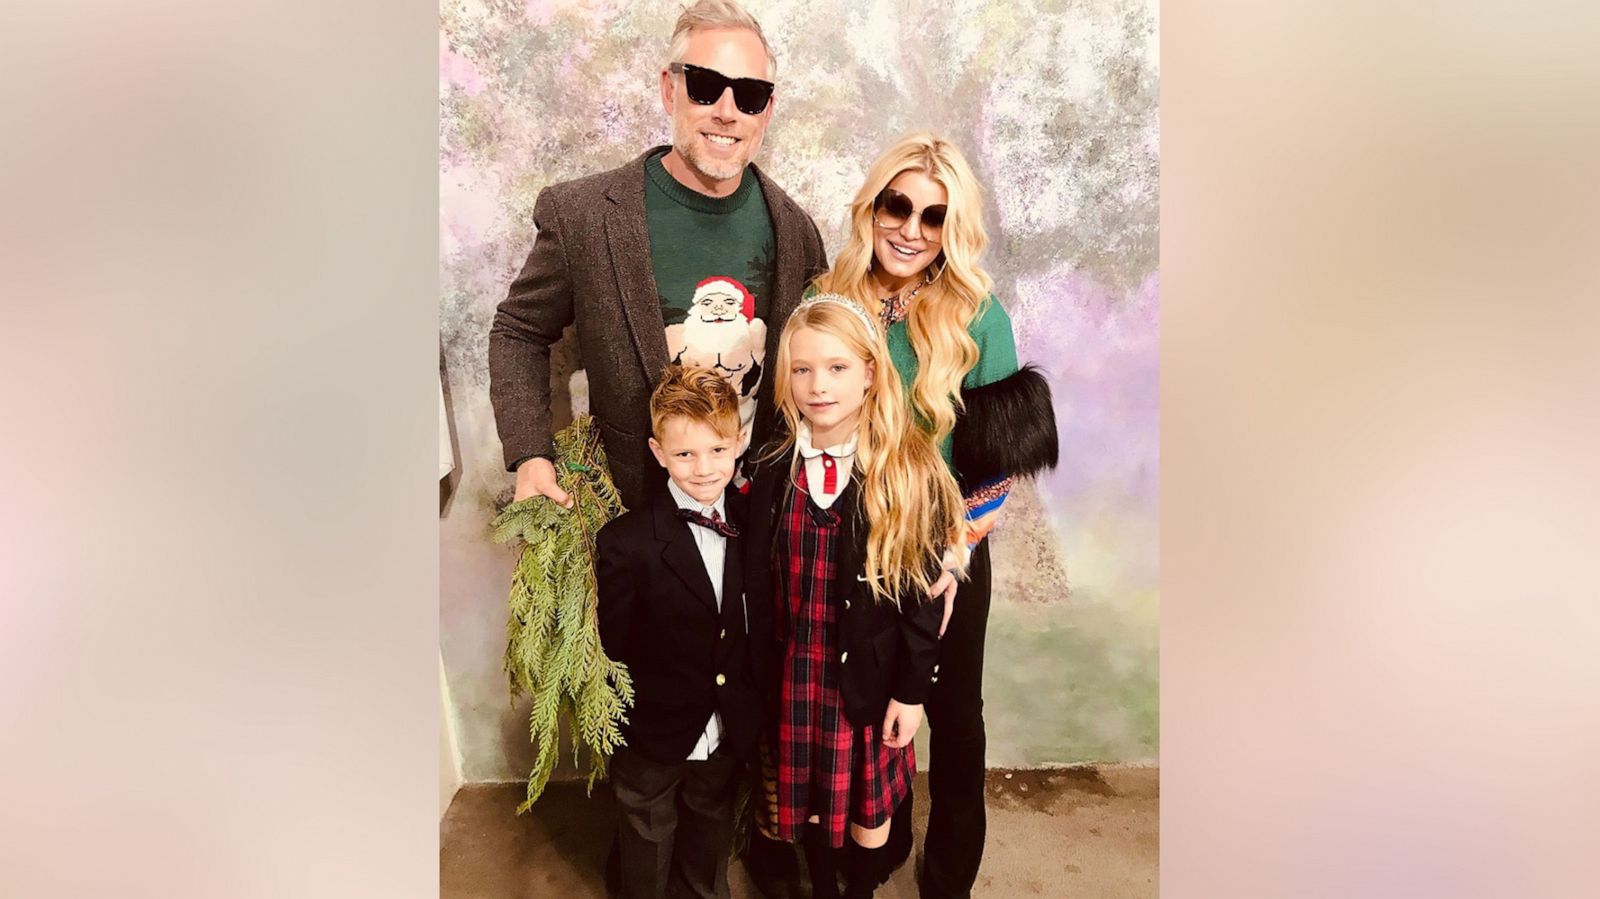 Jessica Simpson shares adorable family photo from her children's